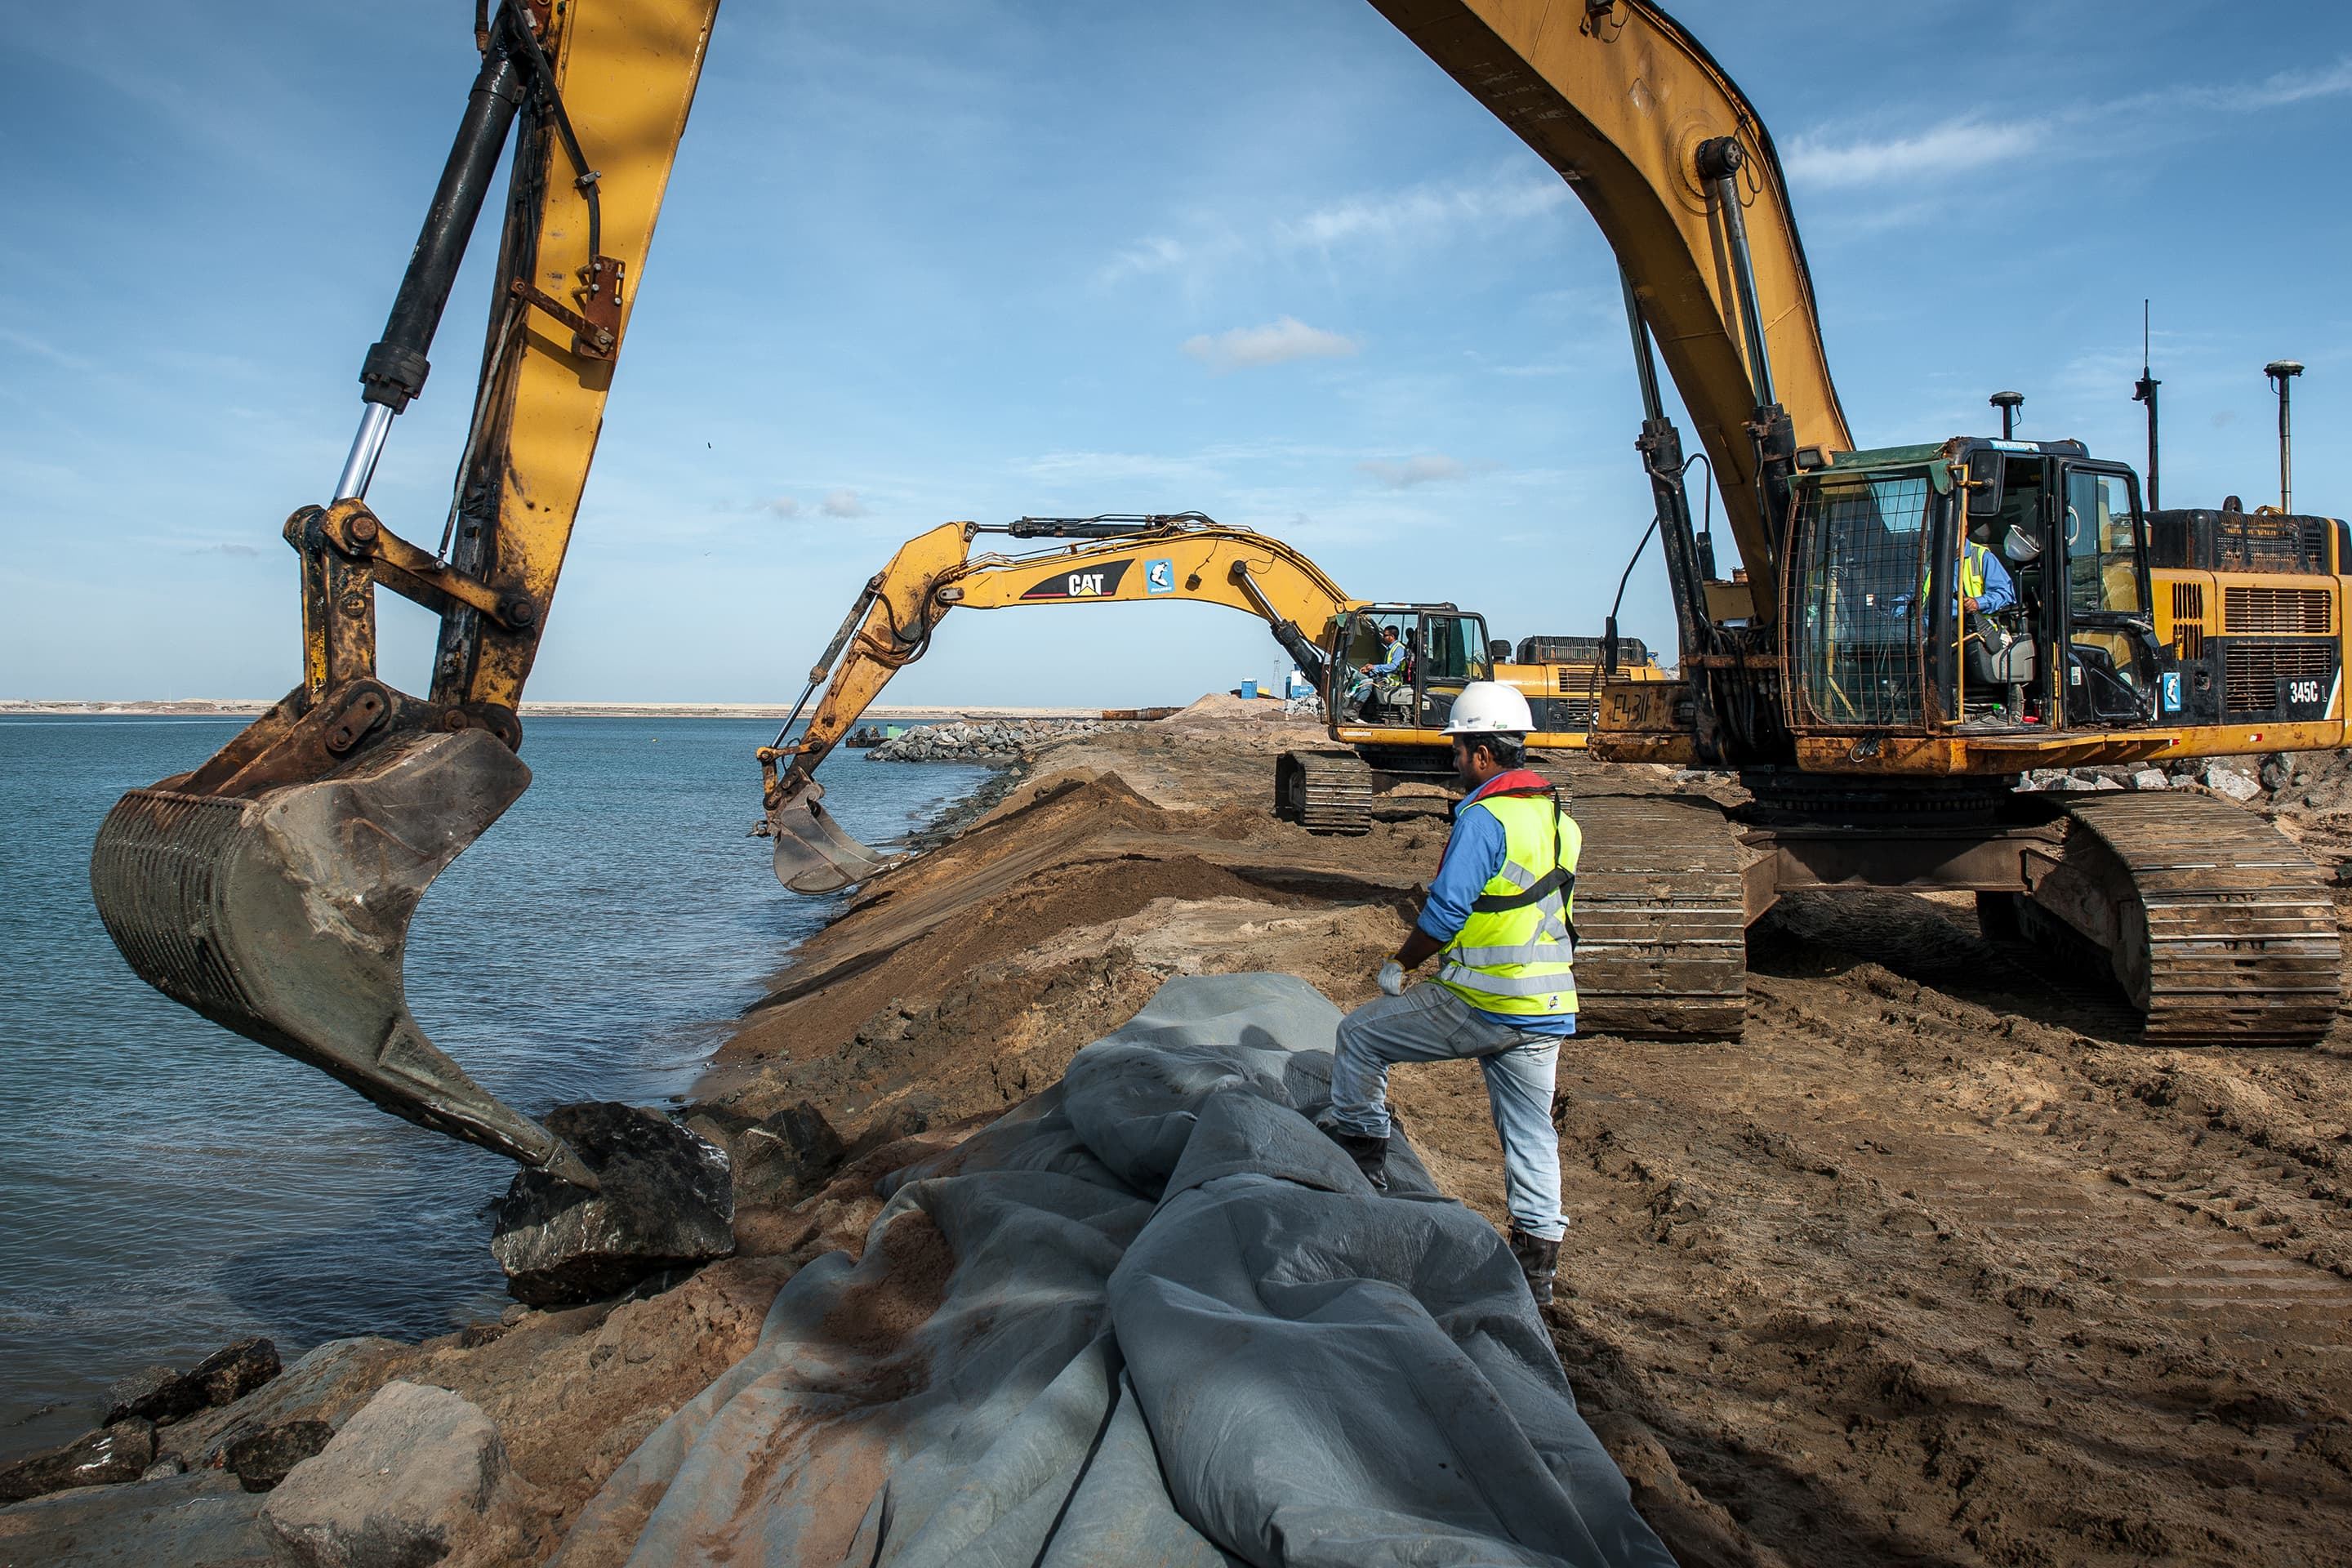 Installation of geotextile to protect a breakwater against erosion